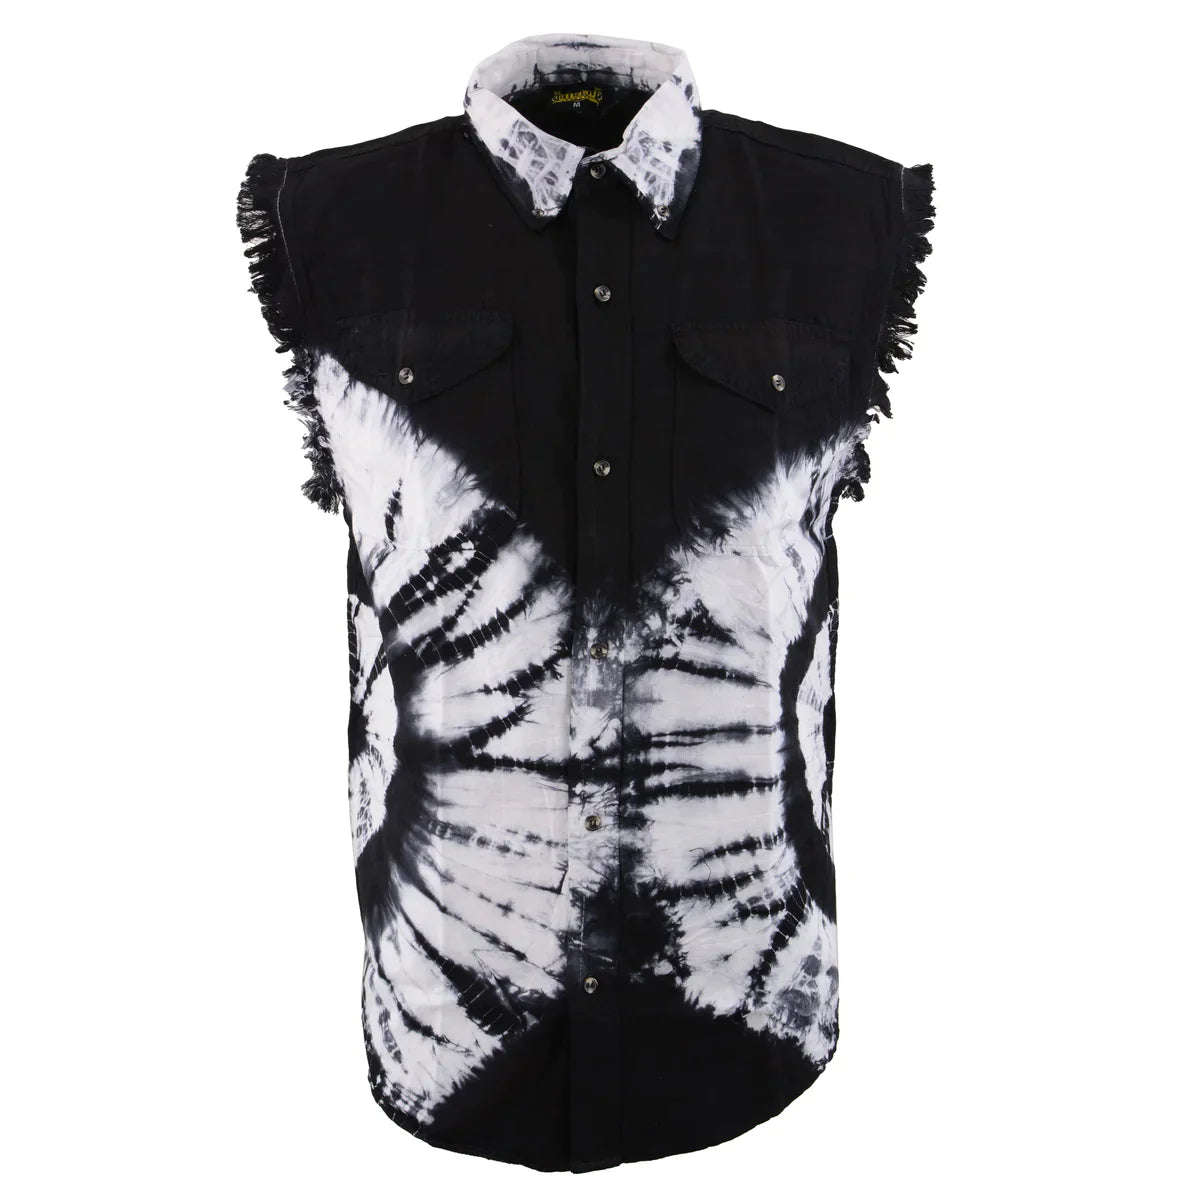 Men’s Black and White Cut Off Button Down Shirt